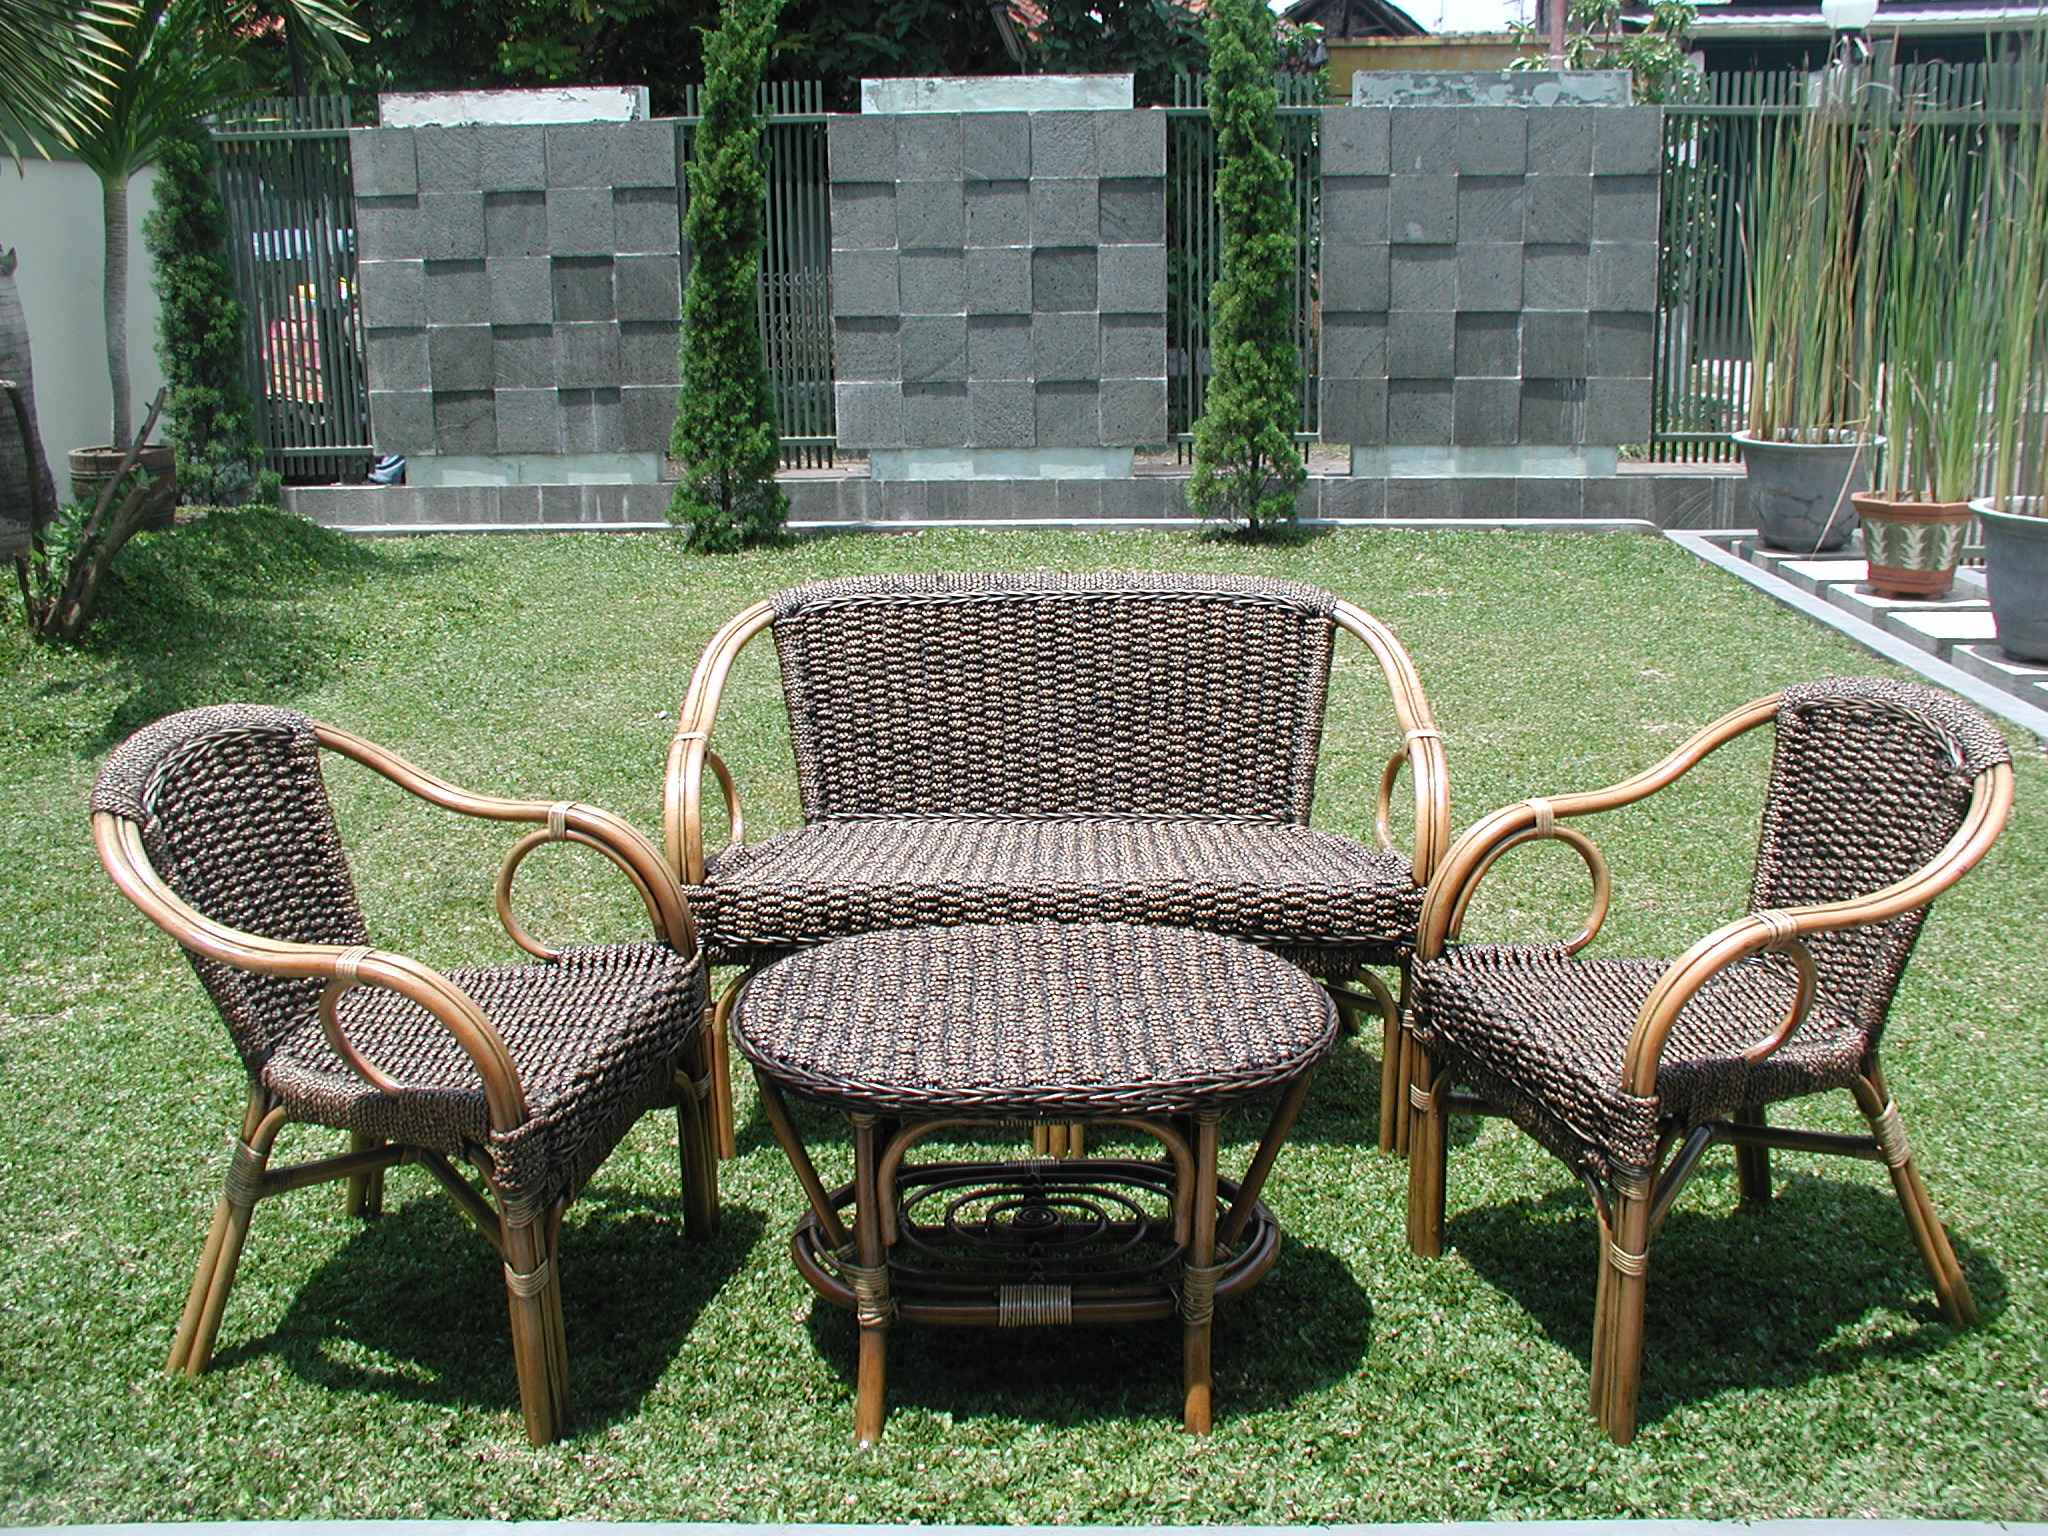 How Long Does Rattan Garden Furniture Last, Does Rattan Garden Furniture Last